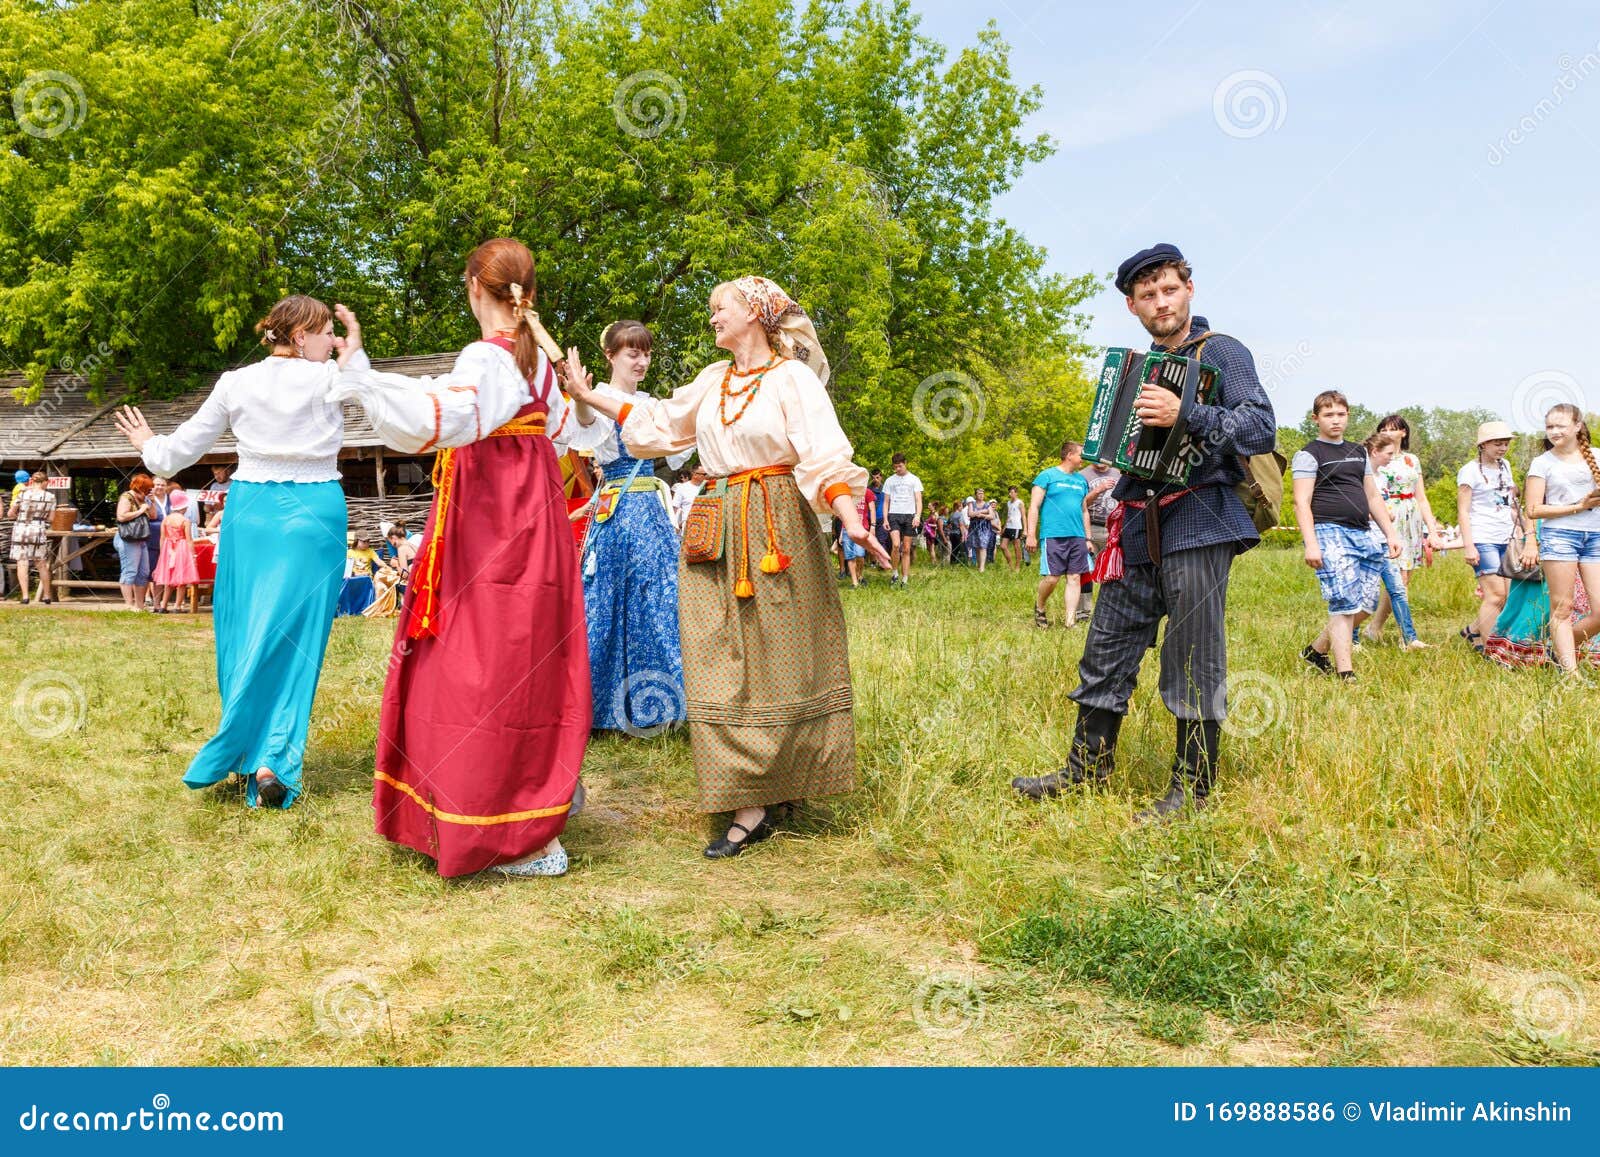 Russian Peasant Women Lead Dance To The Accordion Music